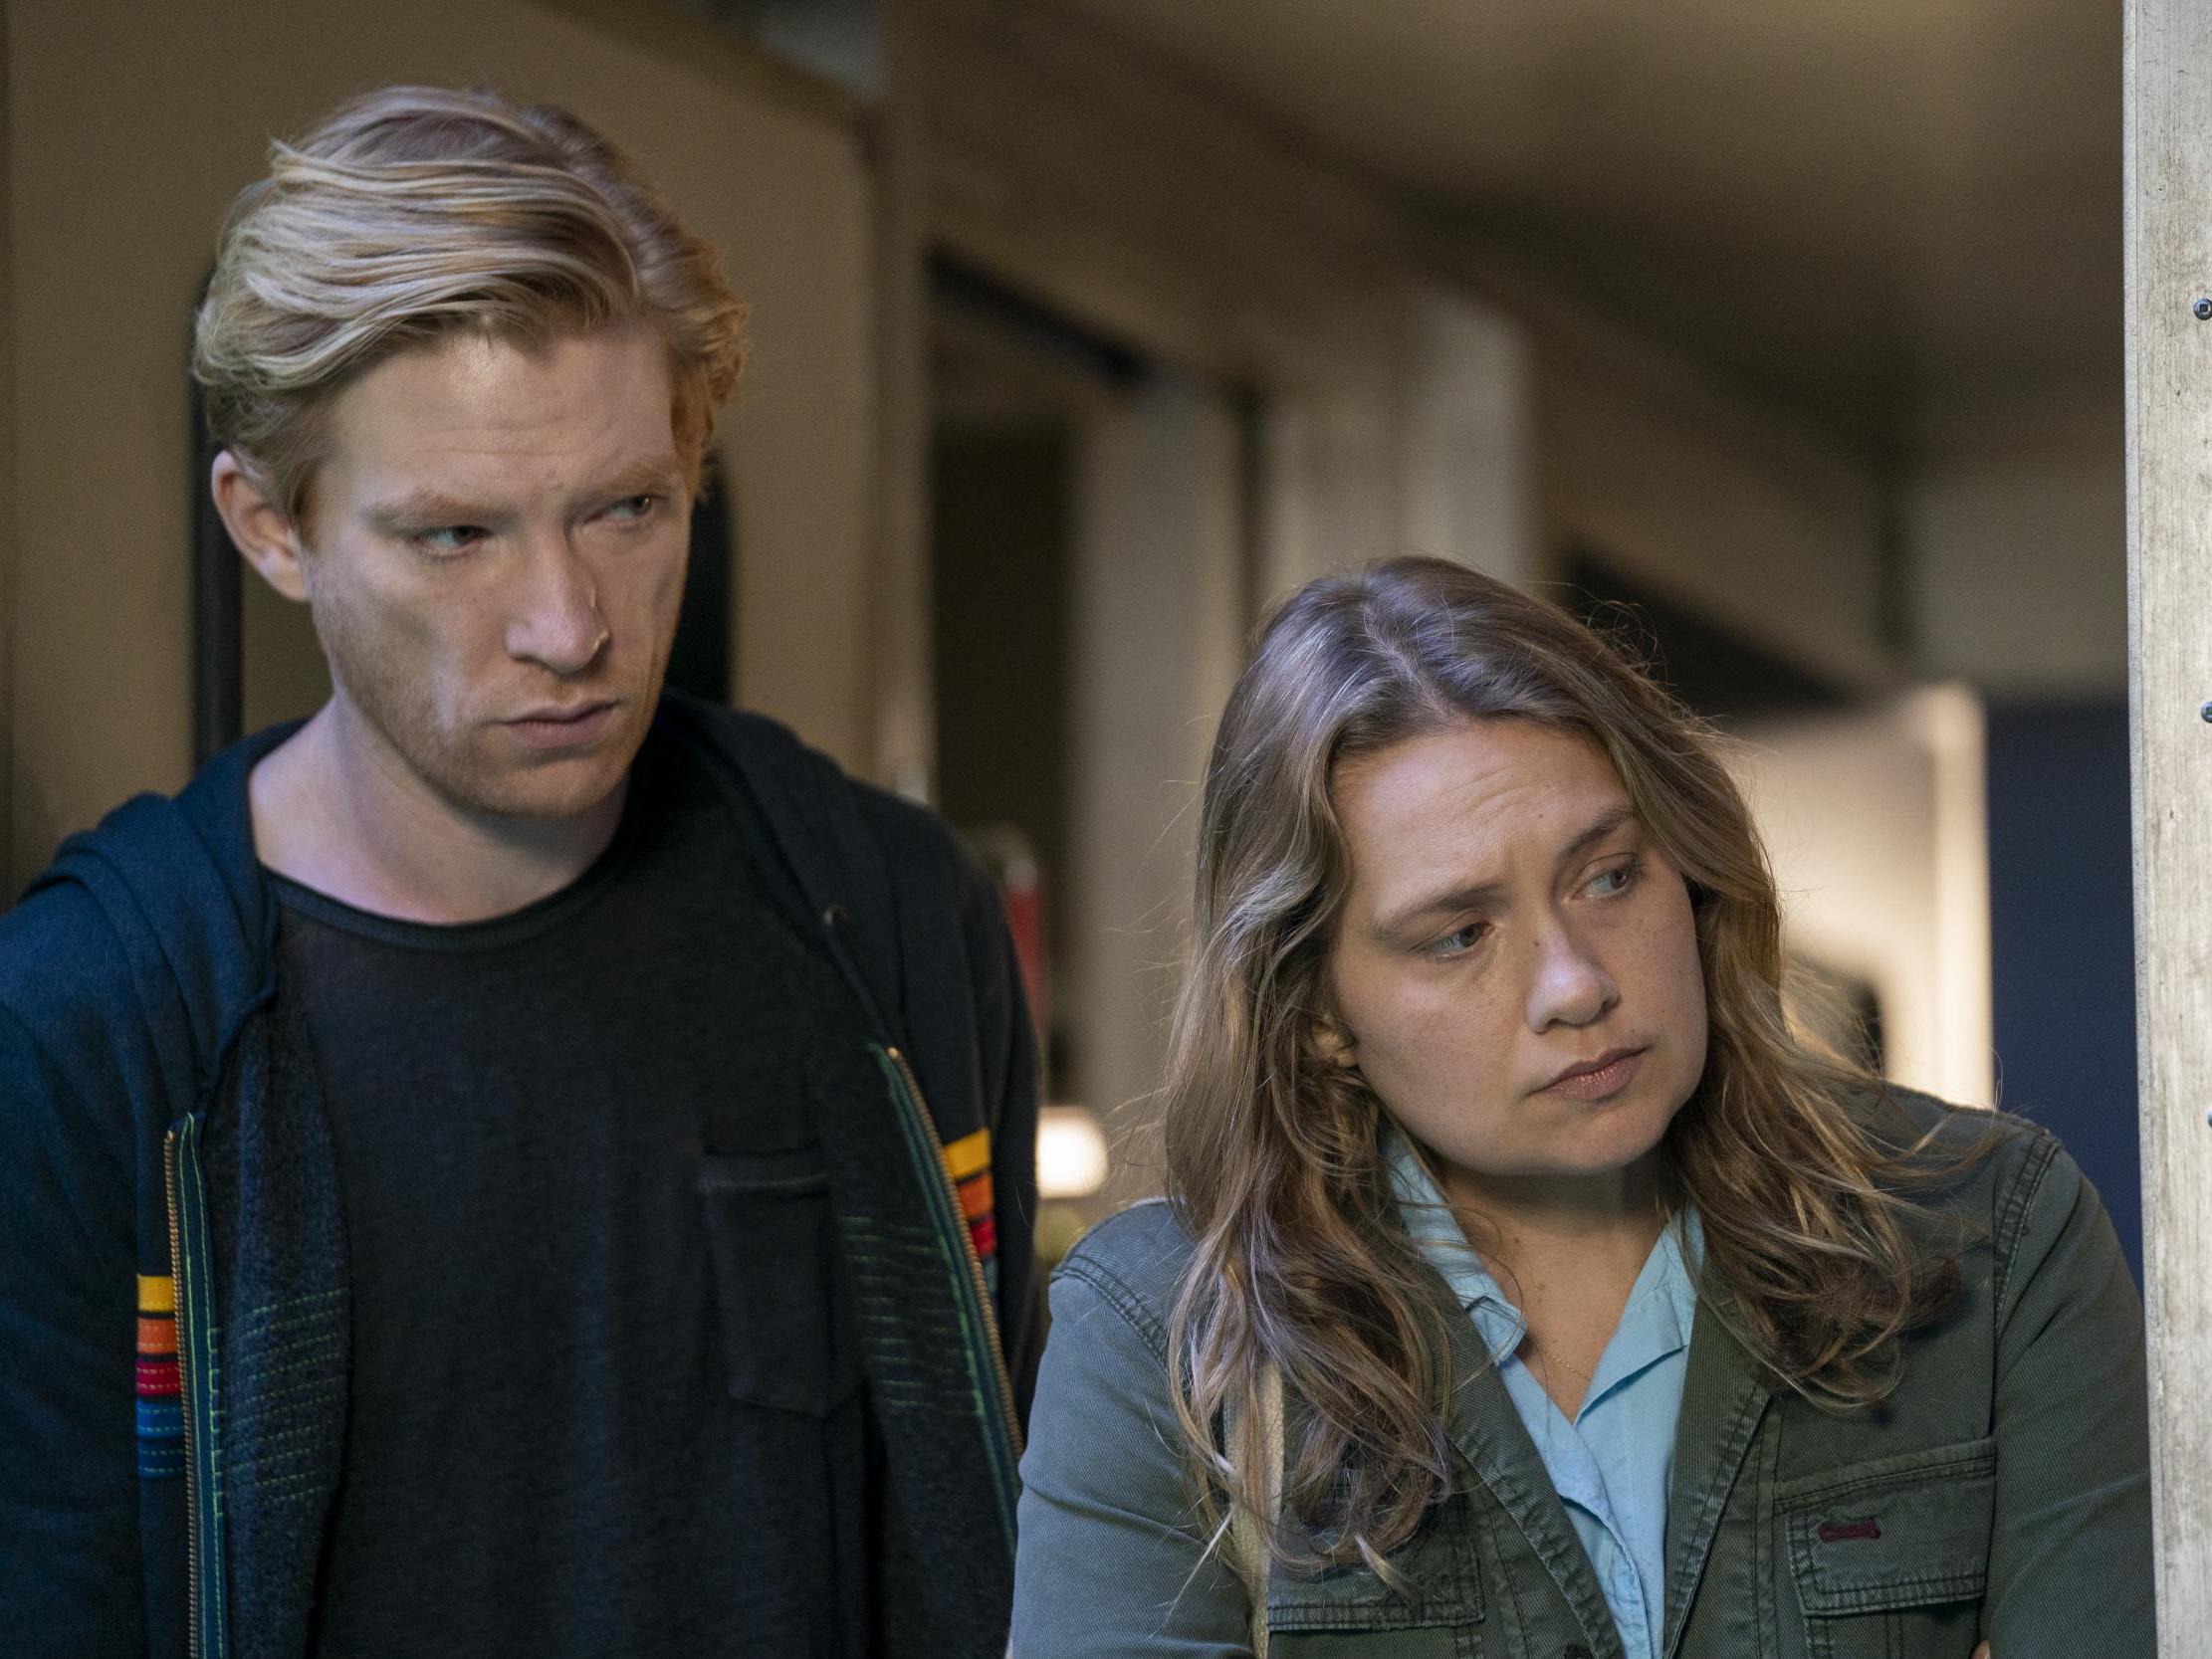 Domhnall Gleeson and Merritt Wever in ‘Run’, which debuts in the UK on Sky Comedy